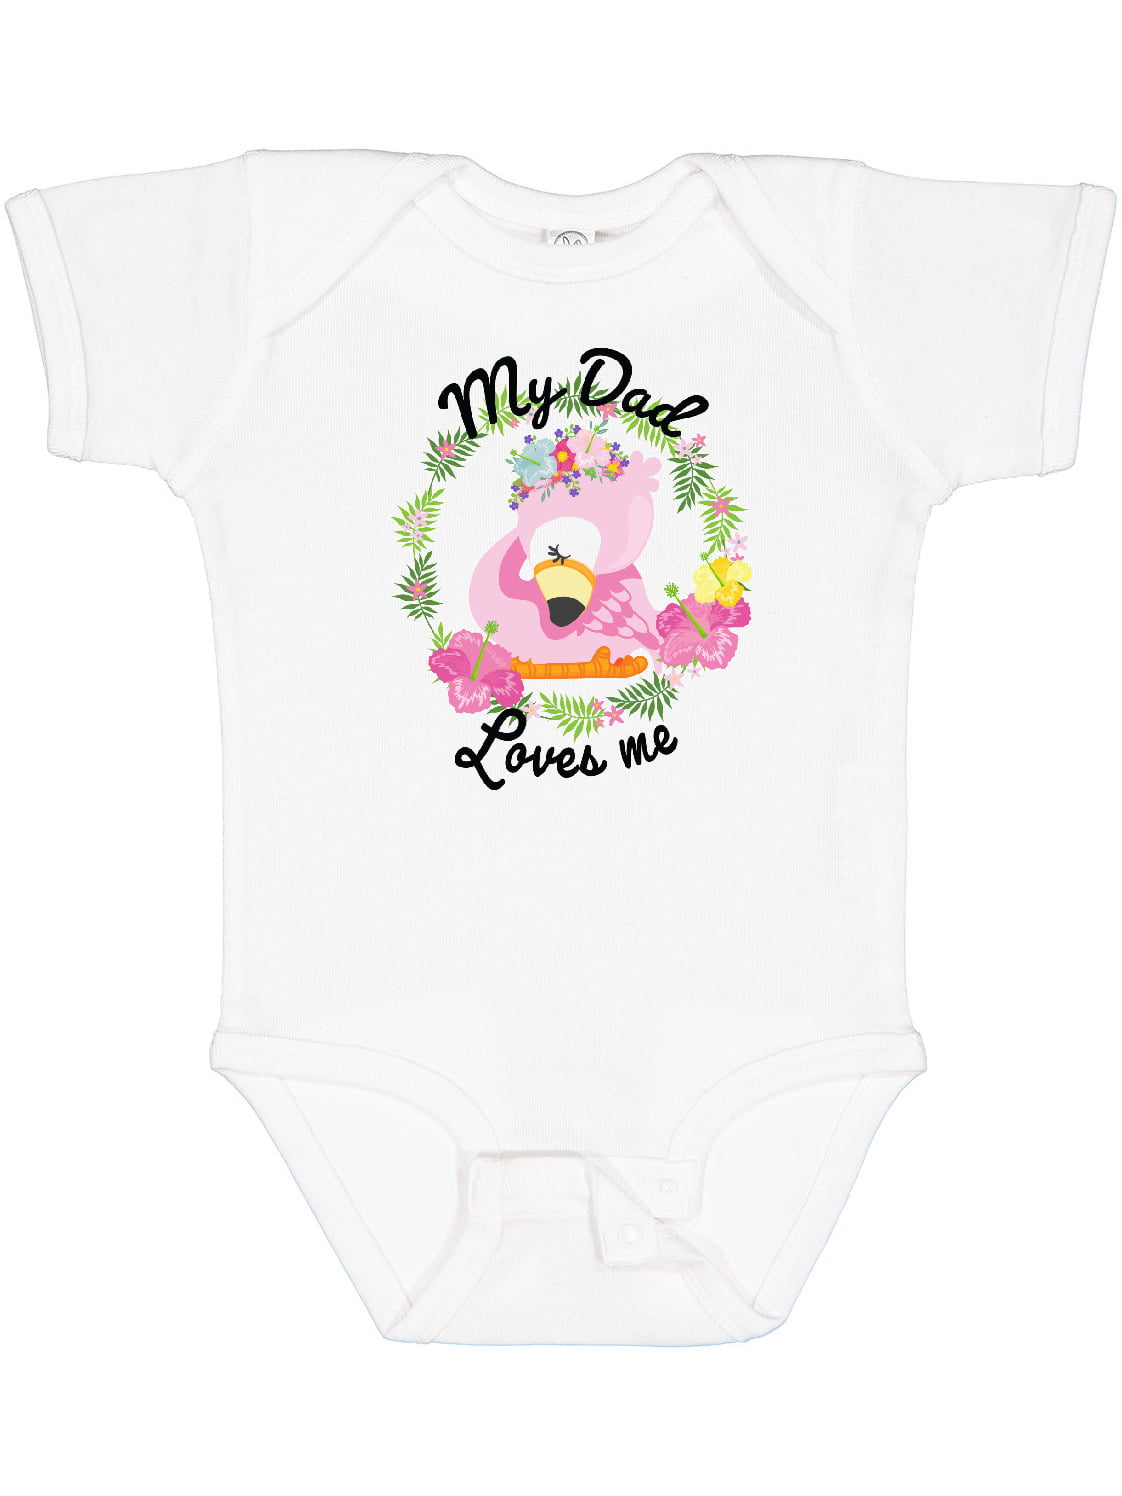 BABY GIRL BOOTS MINI CLUB  BODYSUIT VEST "HELLO I'M NEW HERE"  9-12  MONTHS 